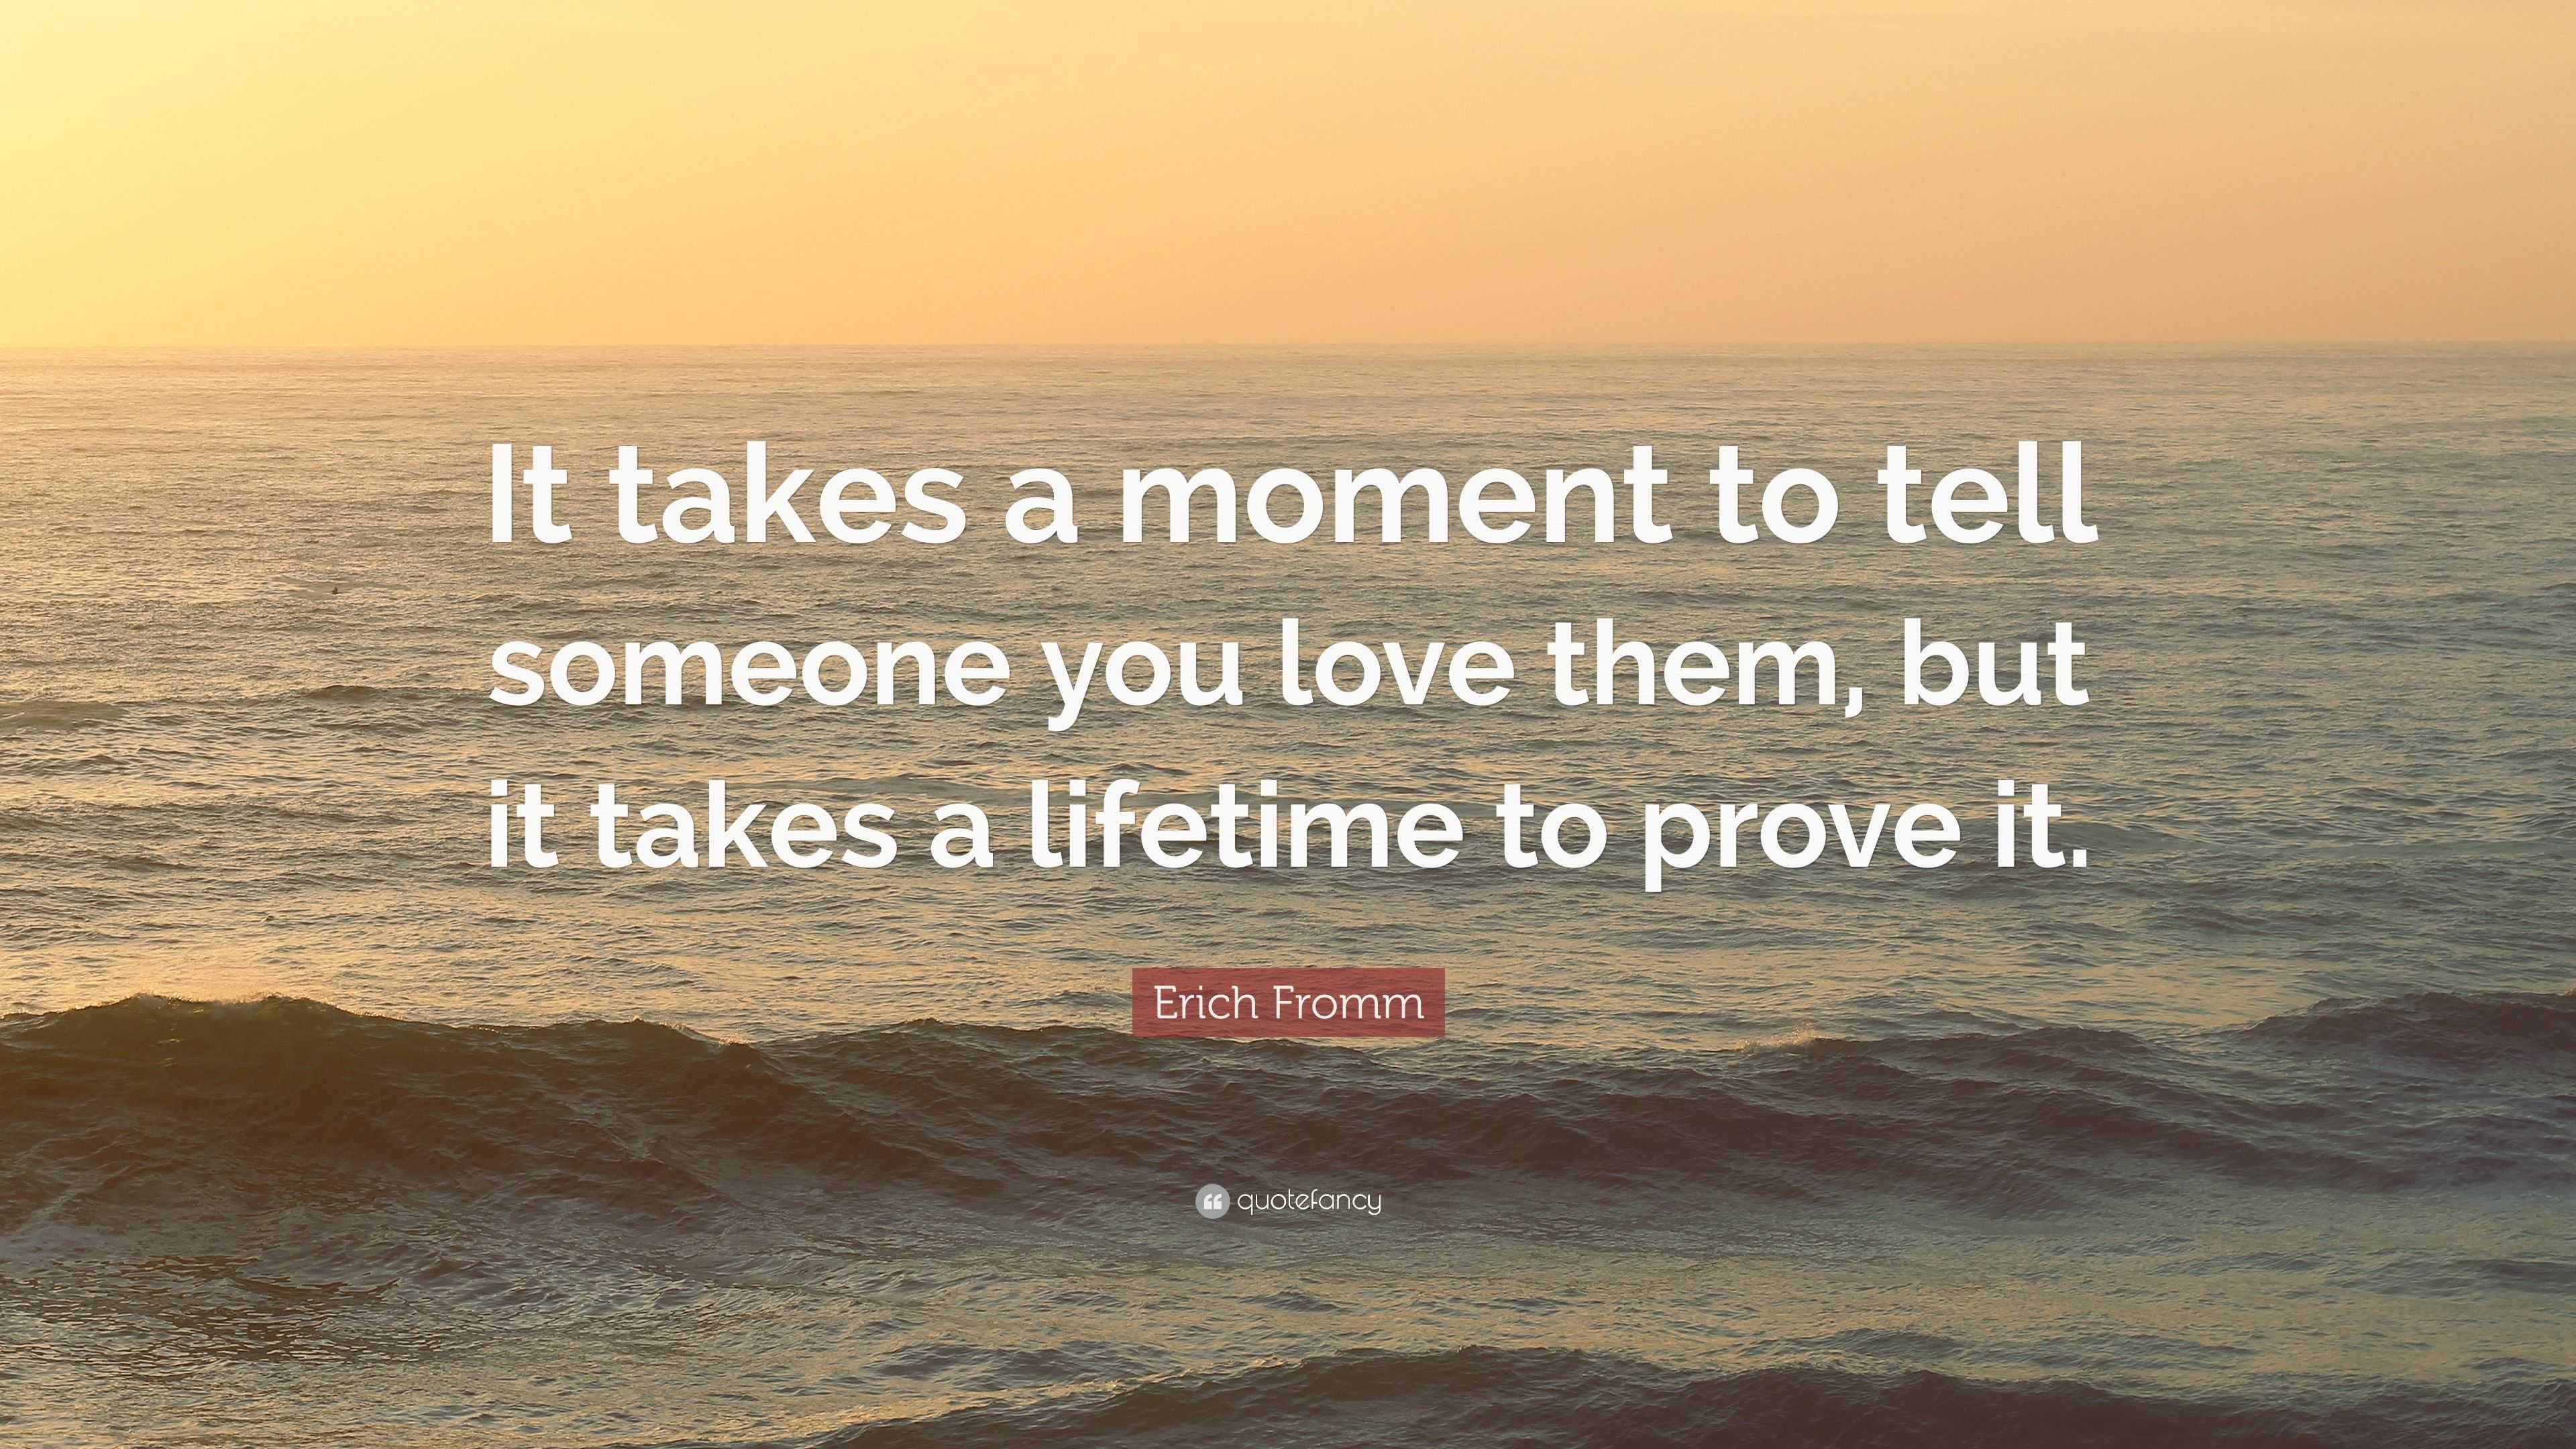 Erich Fromm Quote “It takes a moment to tell someone you love them